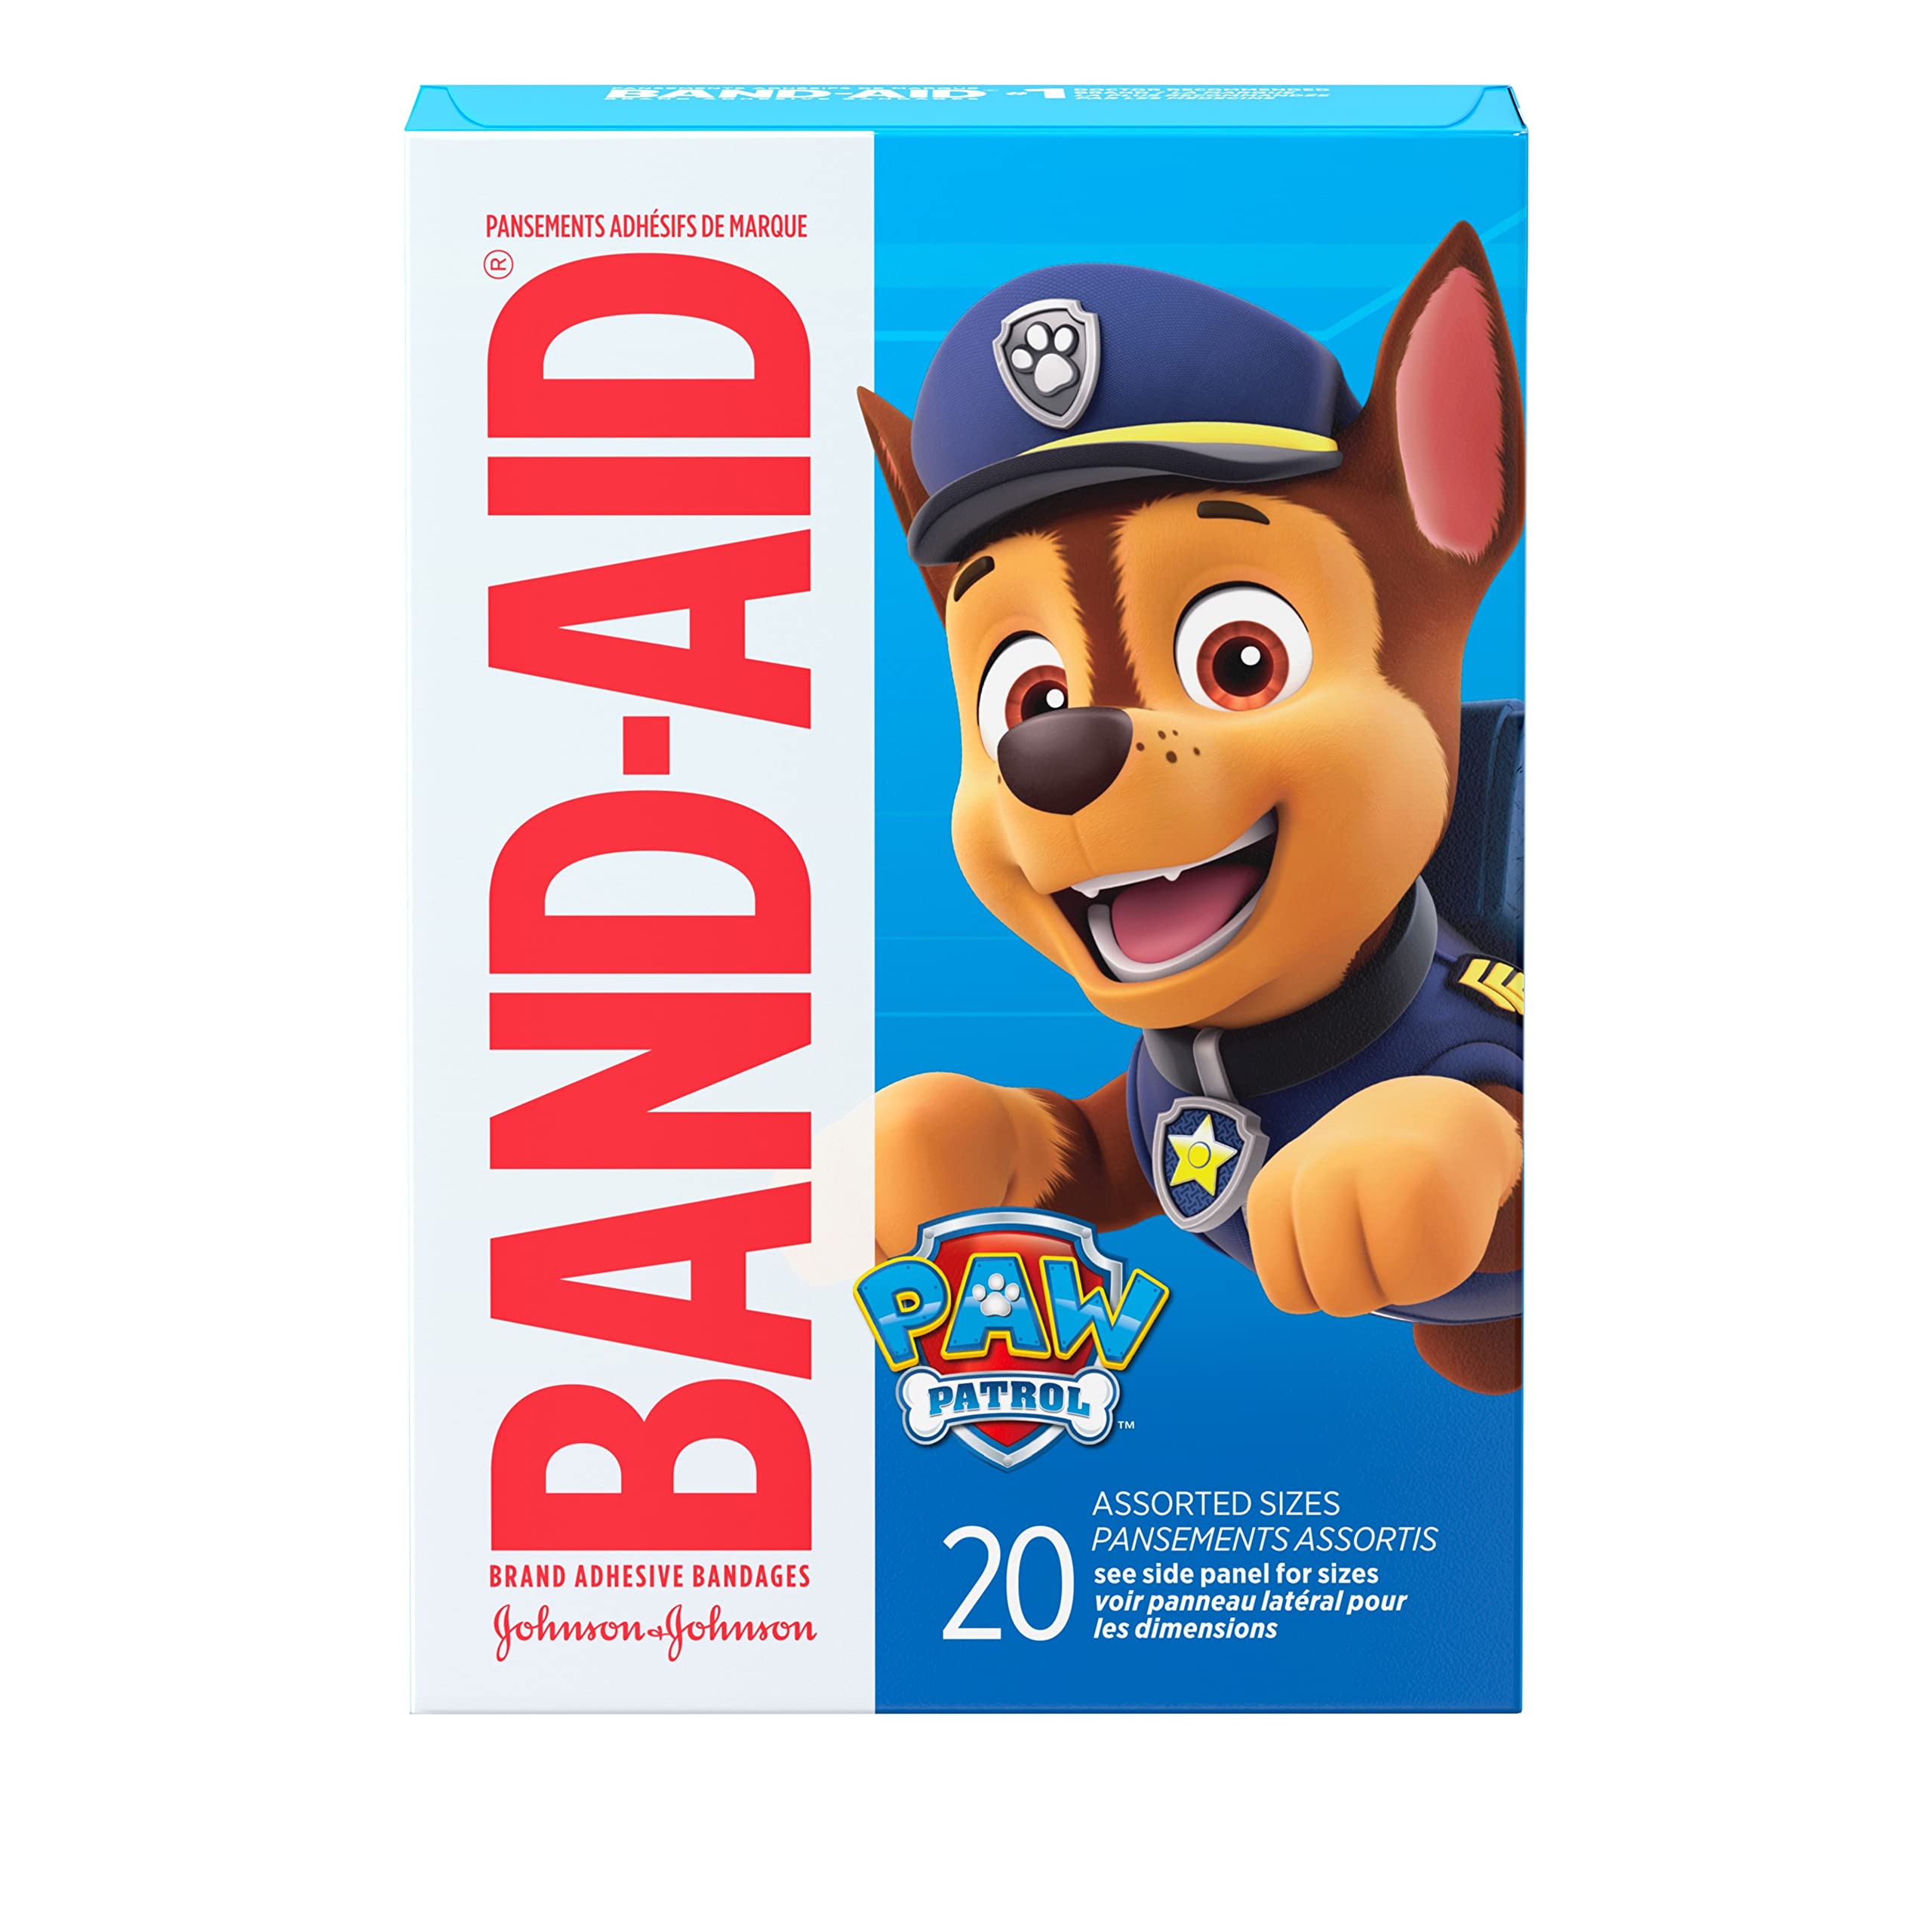 20-Count Band-Aid Brand Bandages for Kids (PAW Patrol, Assorted Sizes) $2.70 w/ S&S + Free Shipping w/ Prime or on $35+